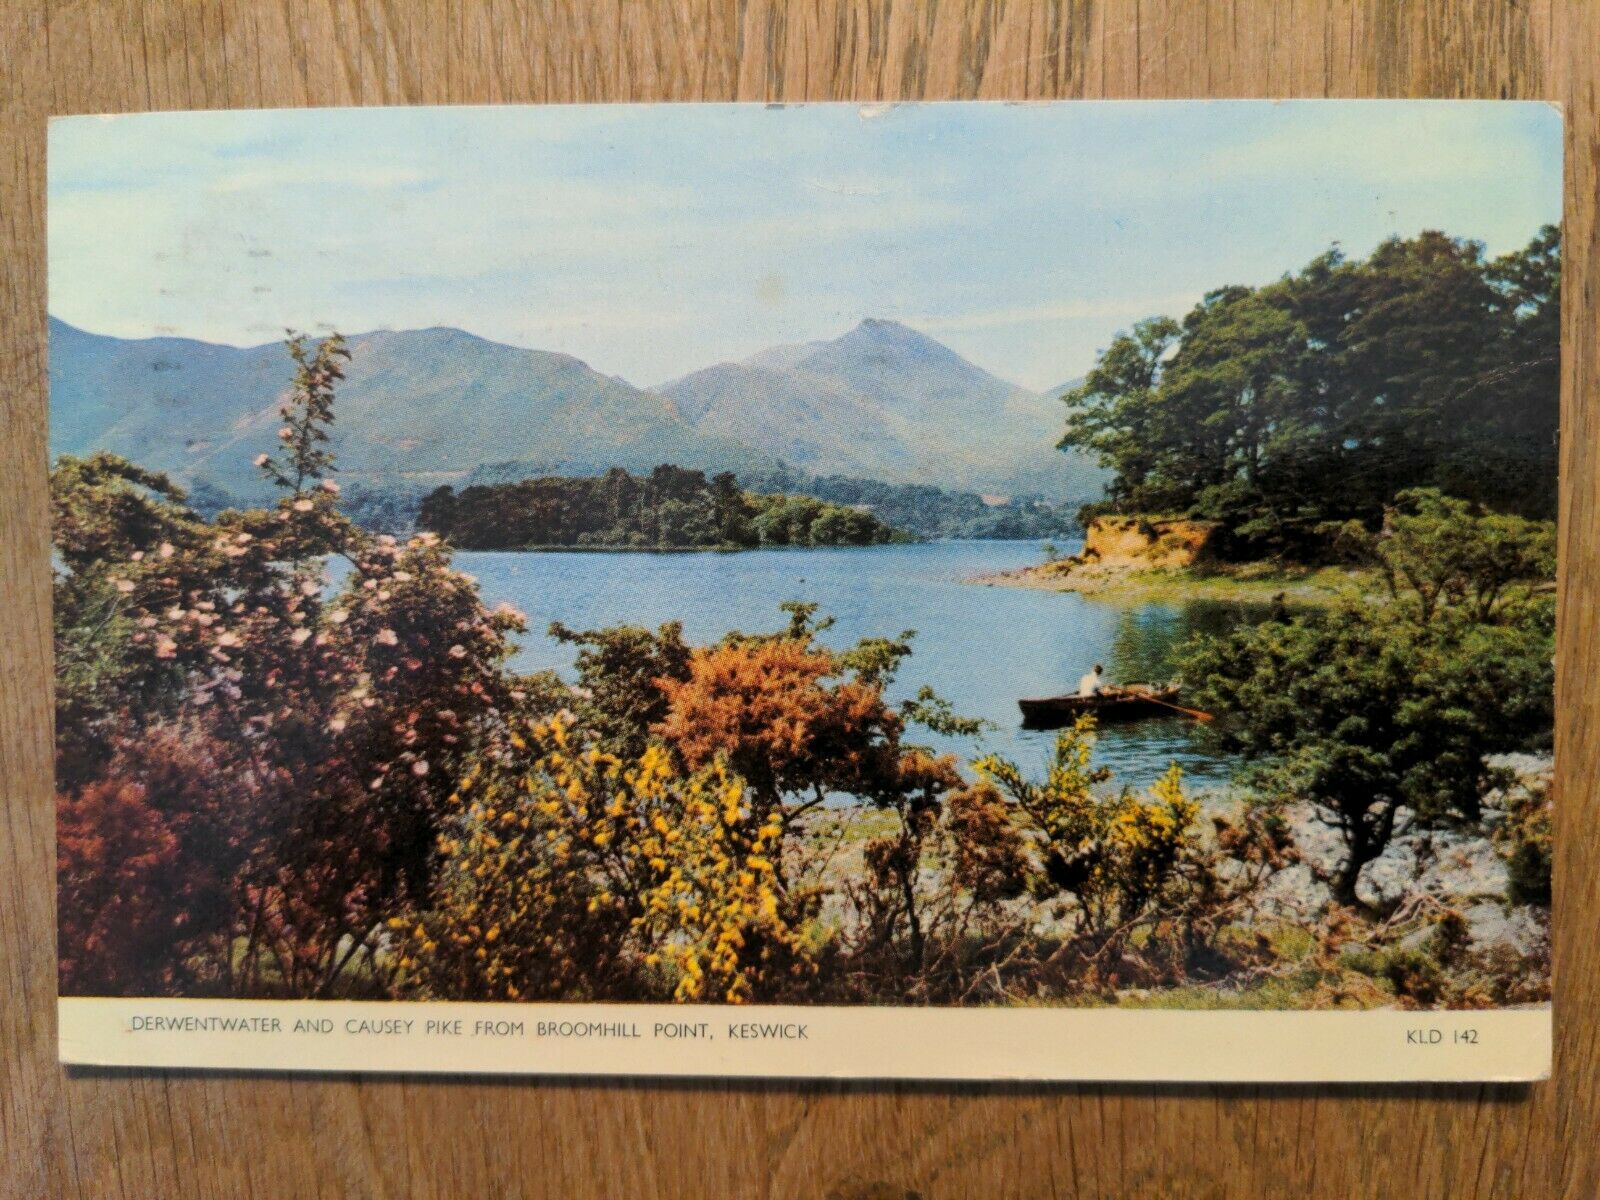 House Clearance - Service - Vintage - Derwentwater Causey Pike from Broomhill Point Keswick Lakes